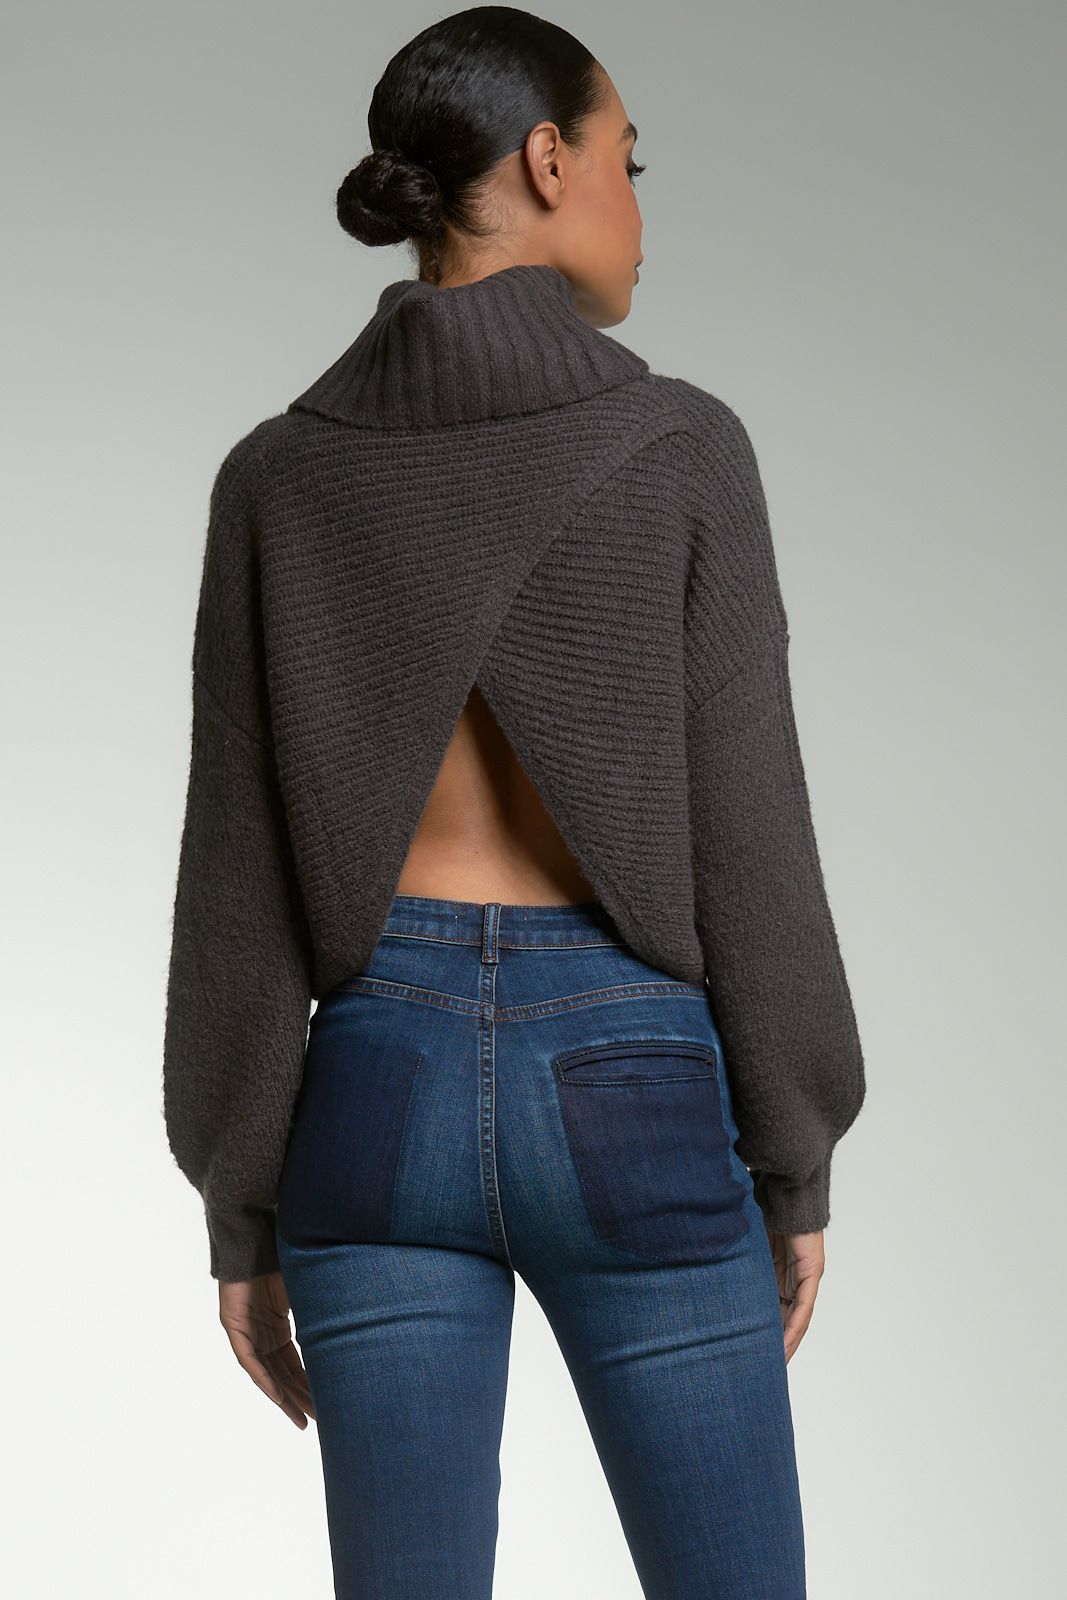 Cross Back Sweater | Charcoal - Main Image Number 2 of 2